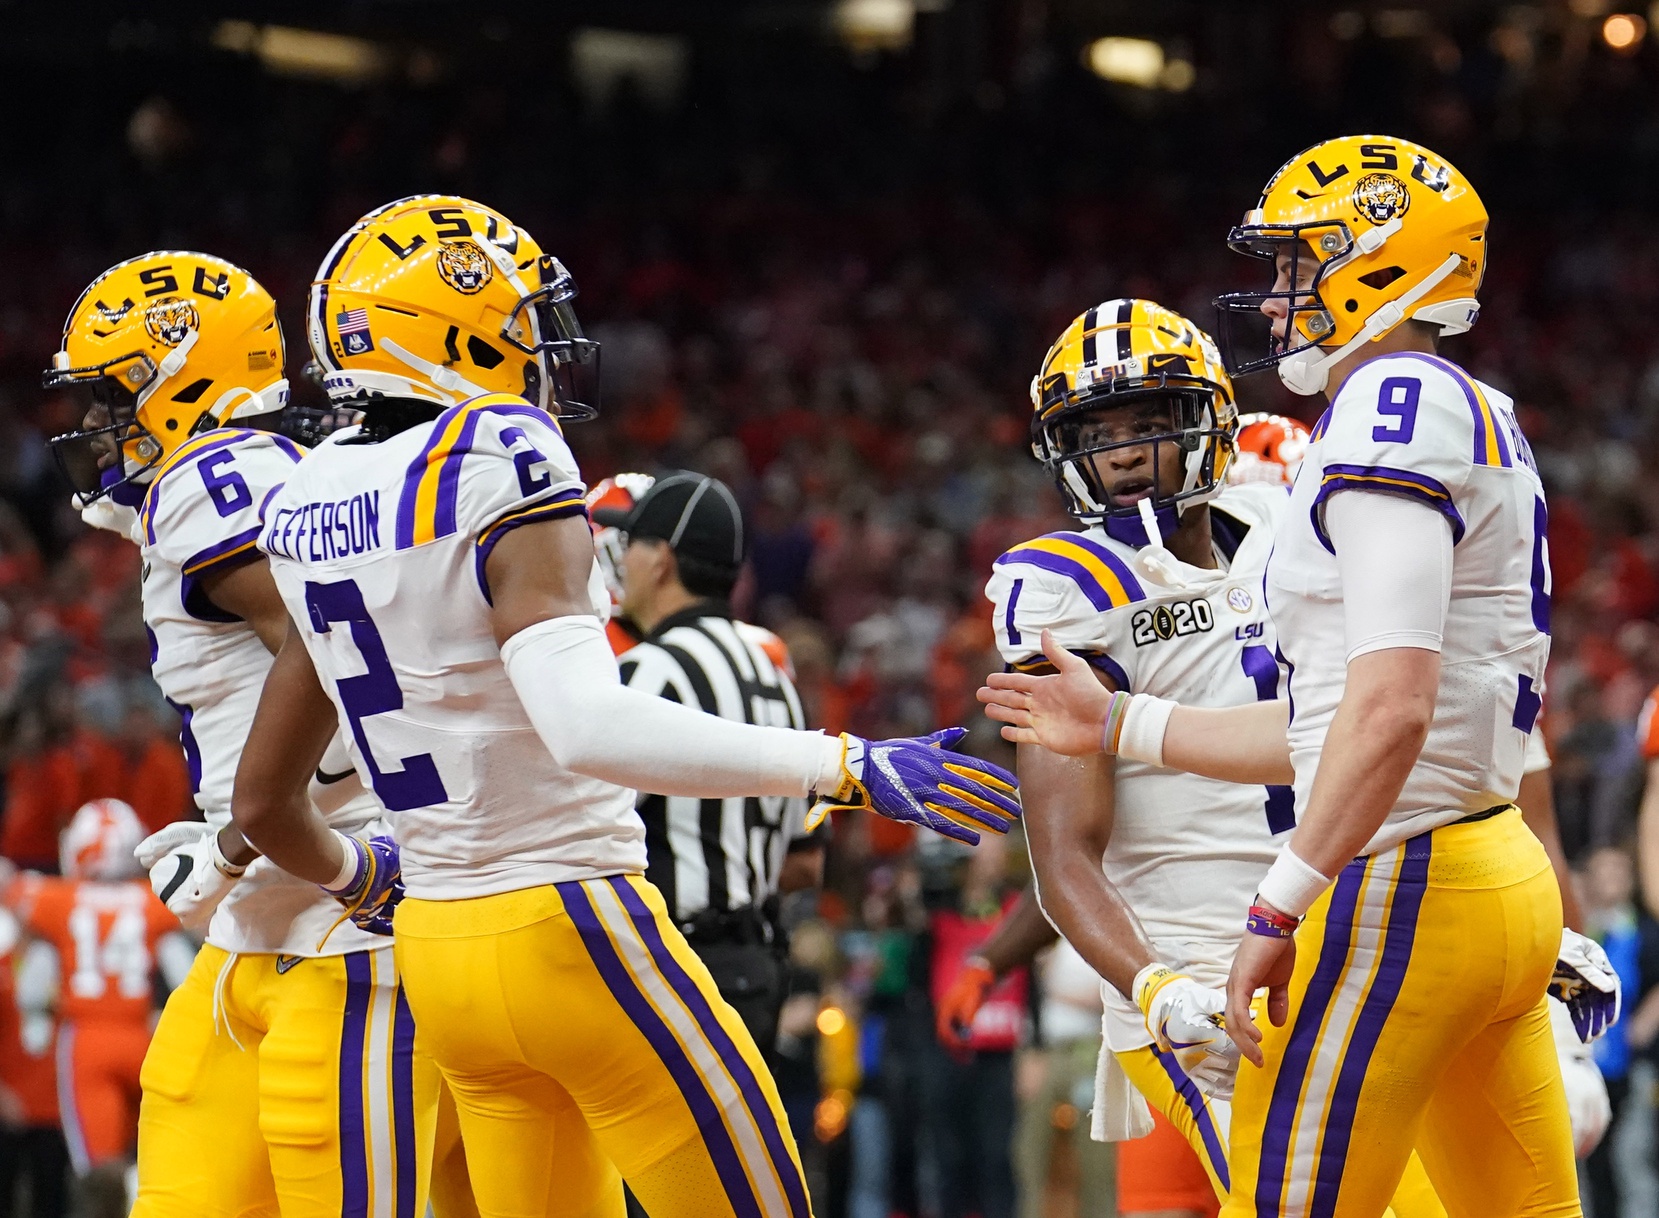 Biggest highlights from LSU's win over Clemson in CFP National Championship Game1659 x 1218